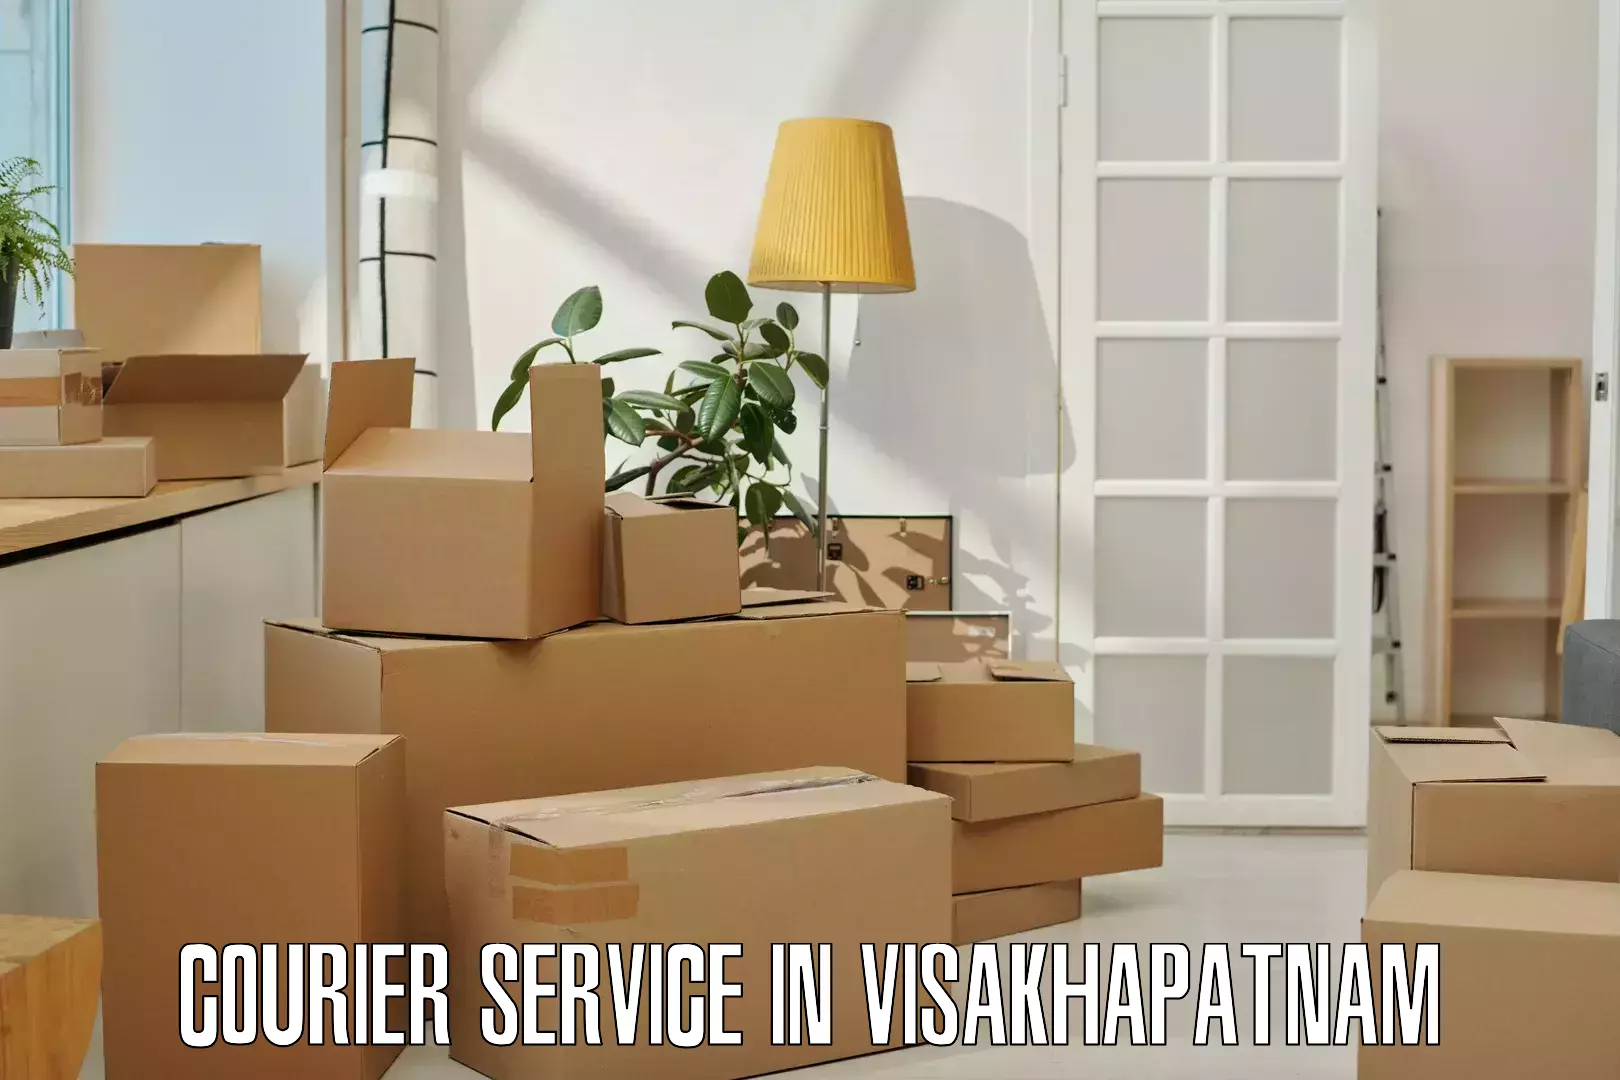 Local delivery service in Visakhapatnam